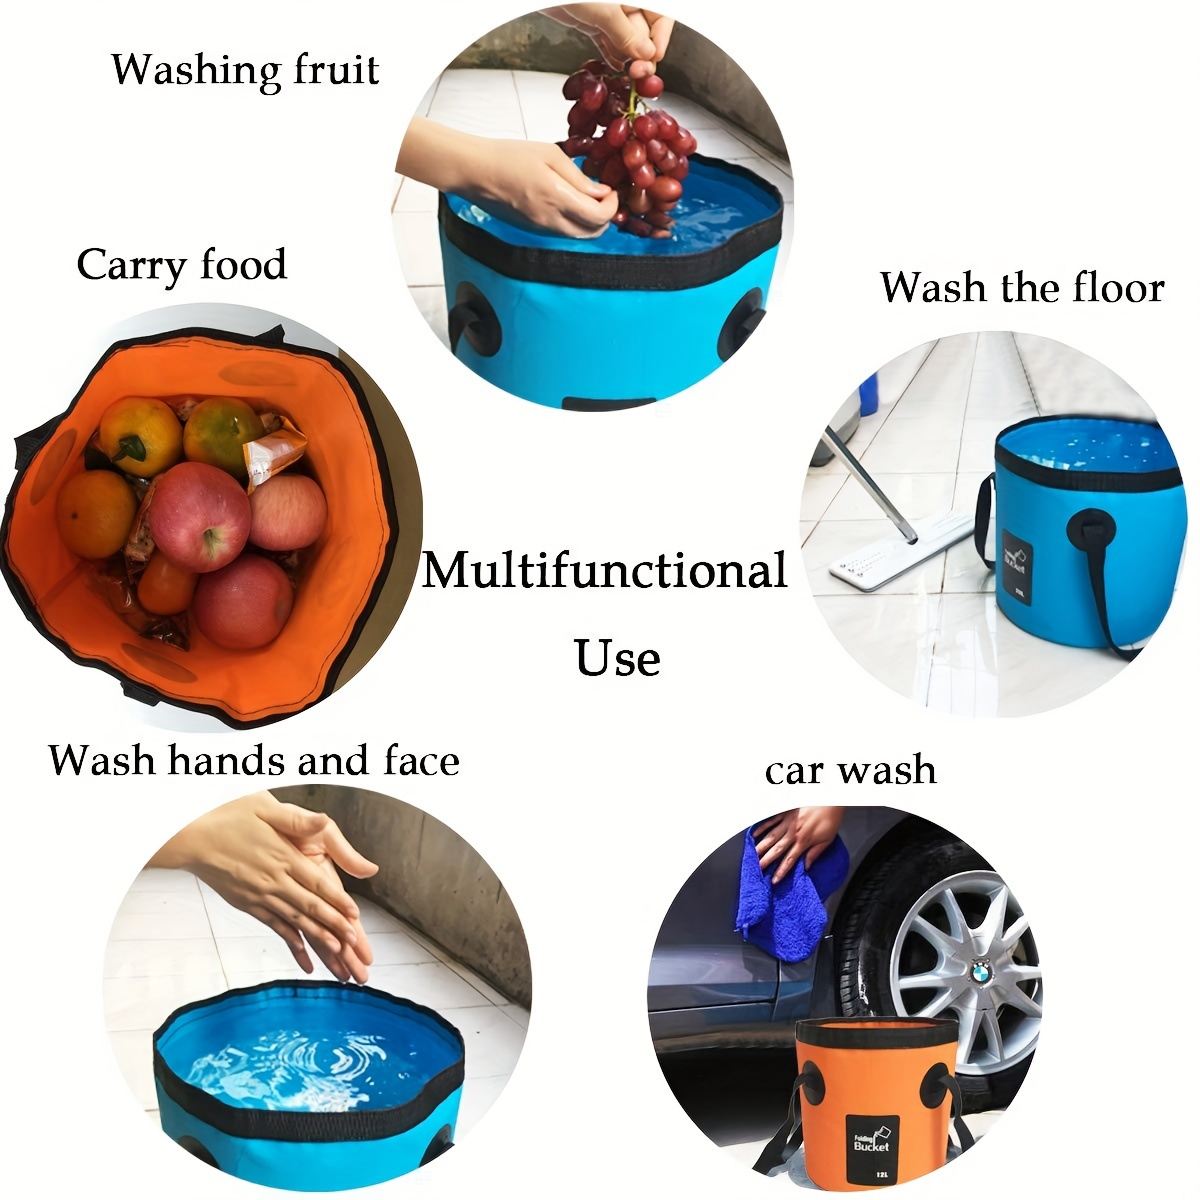 OAVQHLG3B Collapsible Bucket 5 Gallon Container Folding Water Bucket  Portable Wash Basin,Outdoor Camping Accessories for Camping Fishing  Travelling Outdoor Gardening Car Washing 